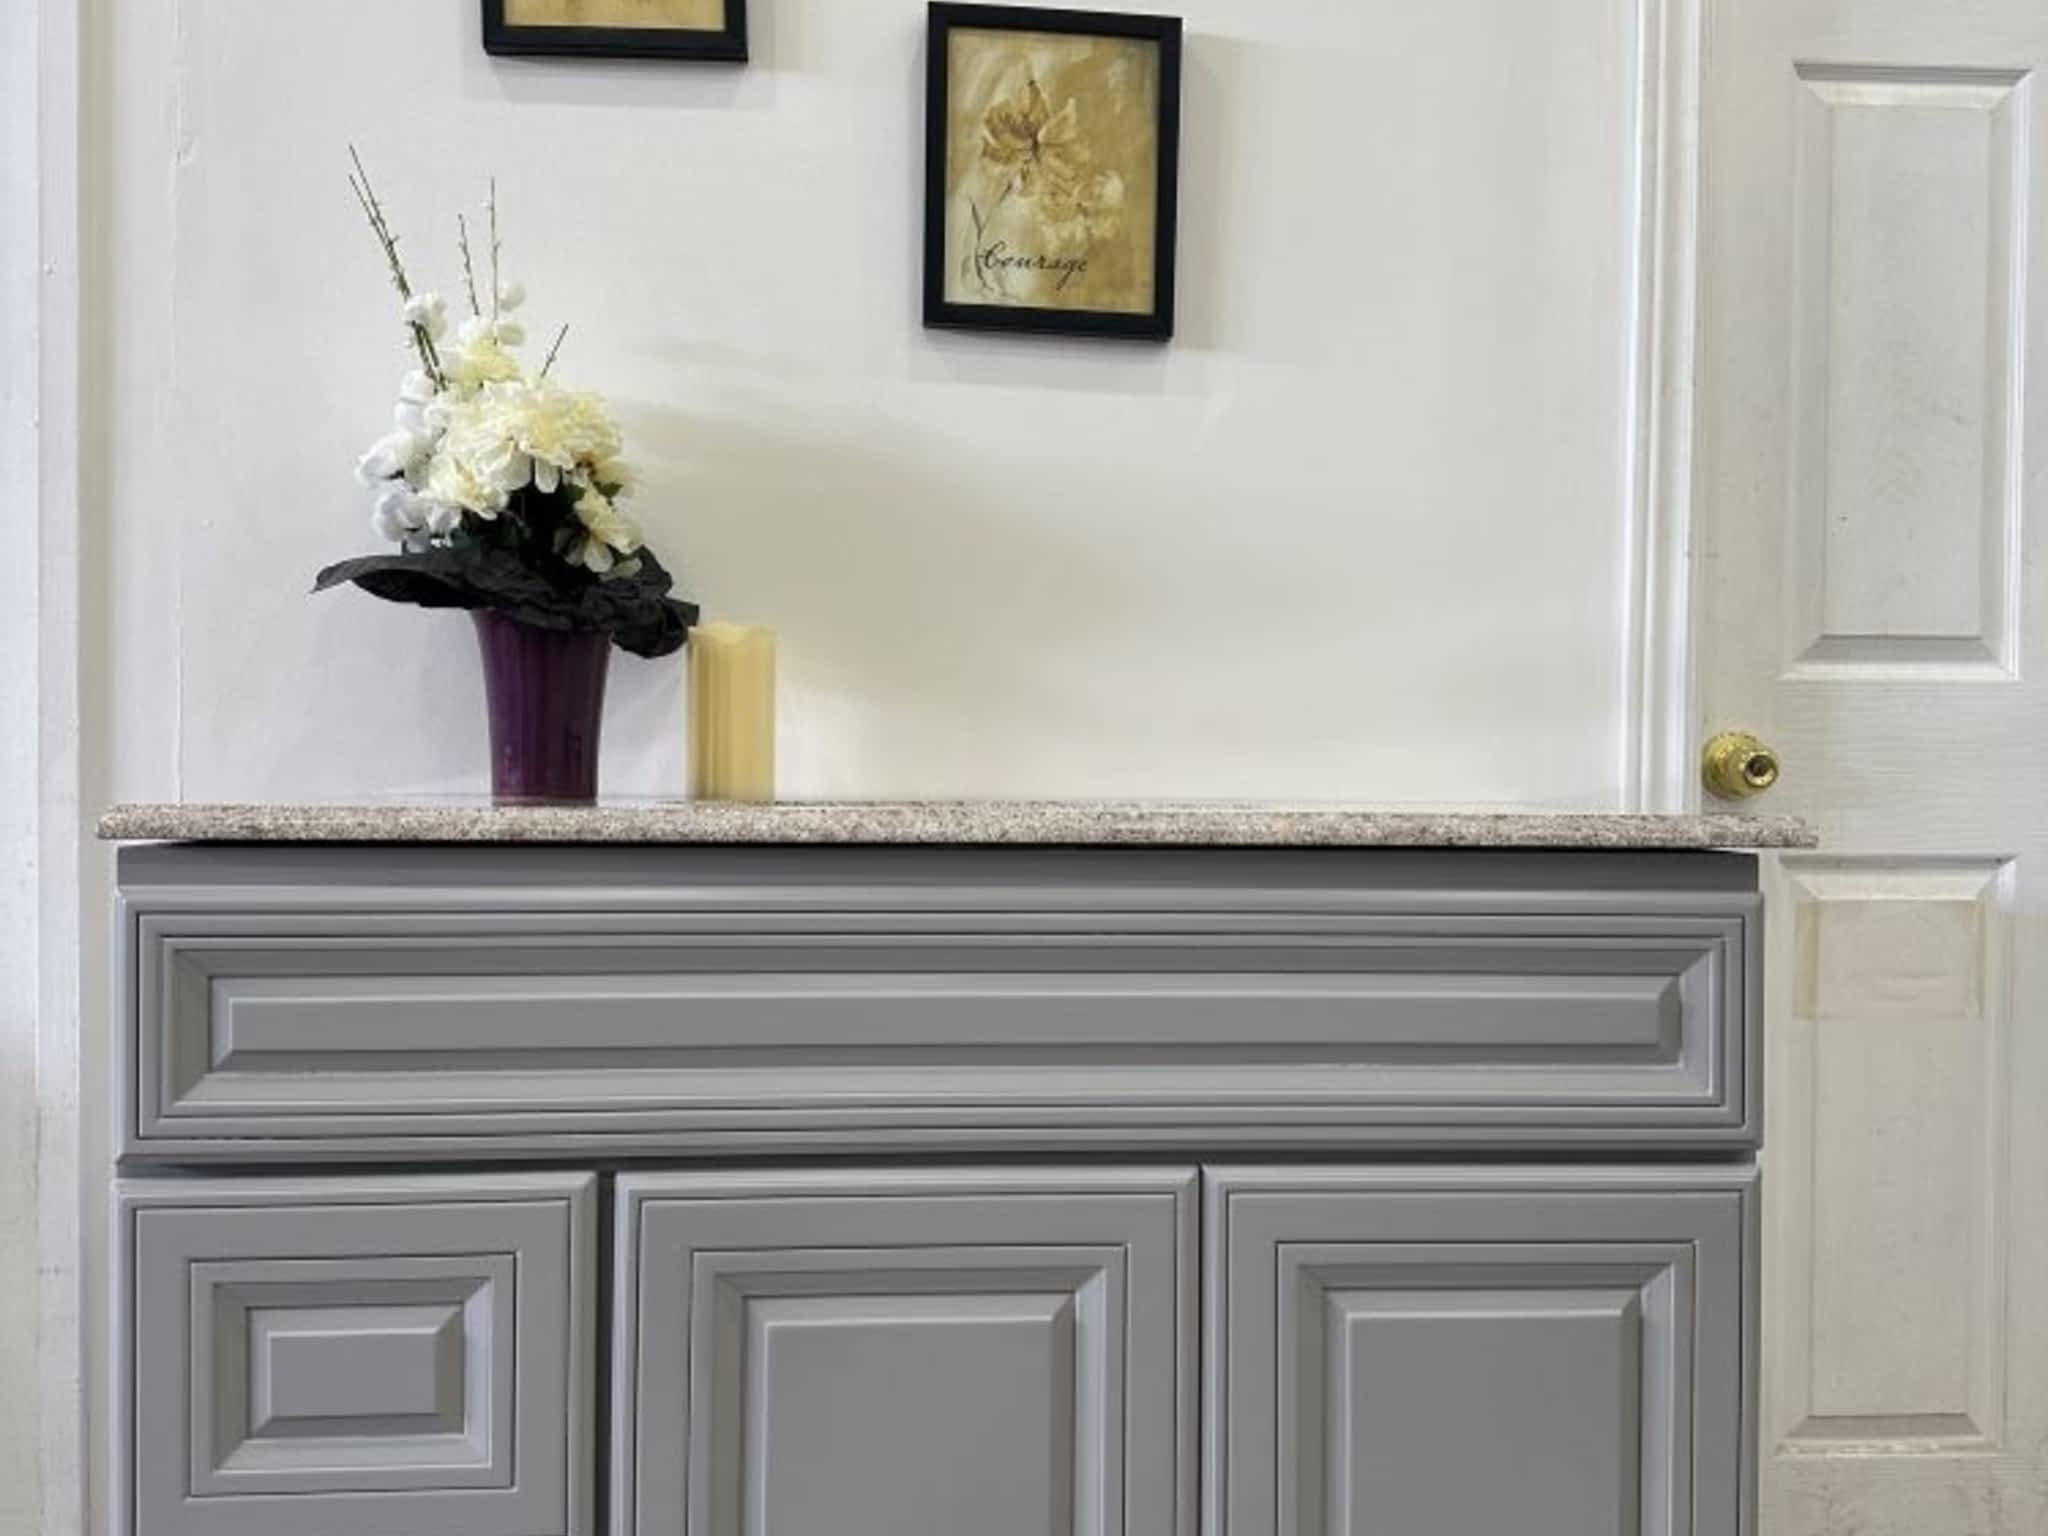 photo Enhome Cabinetry